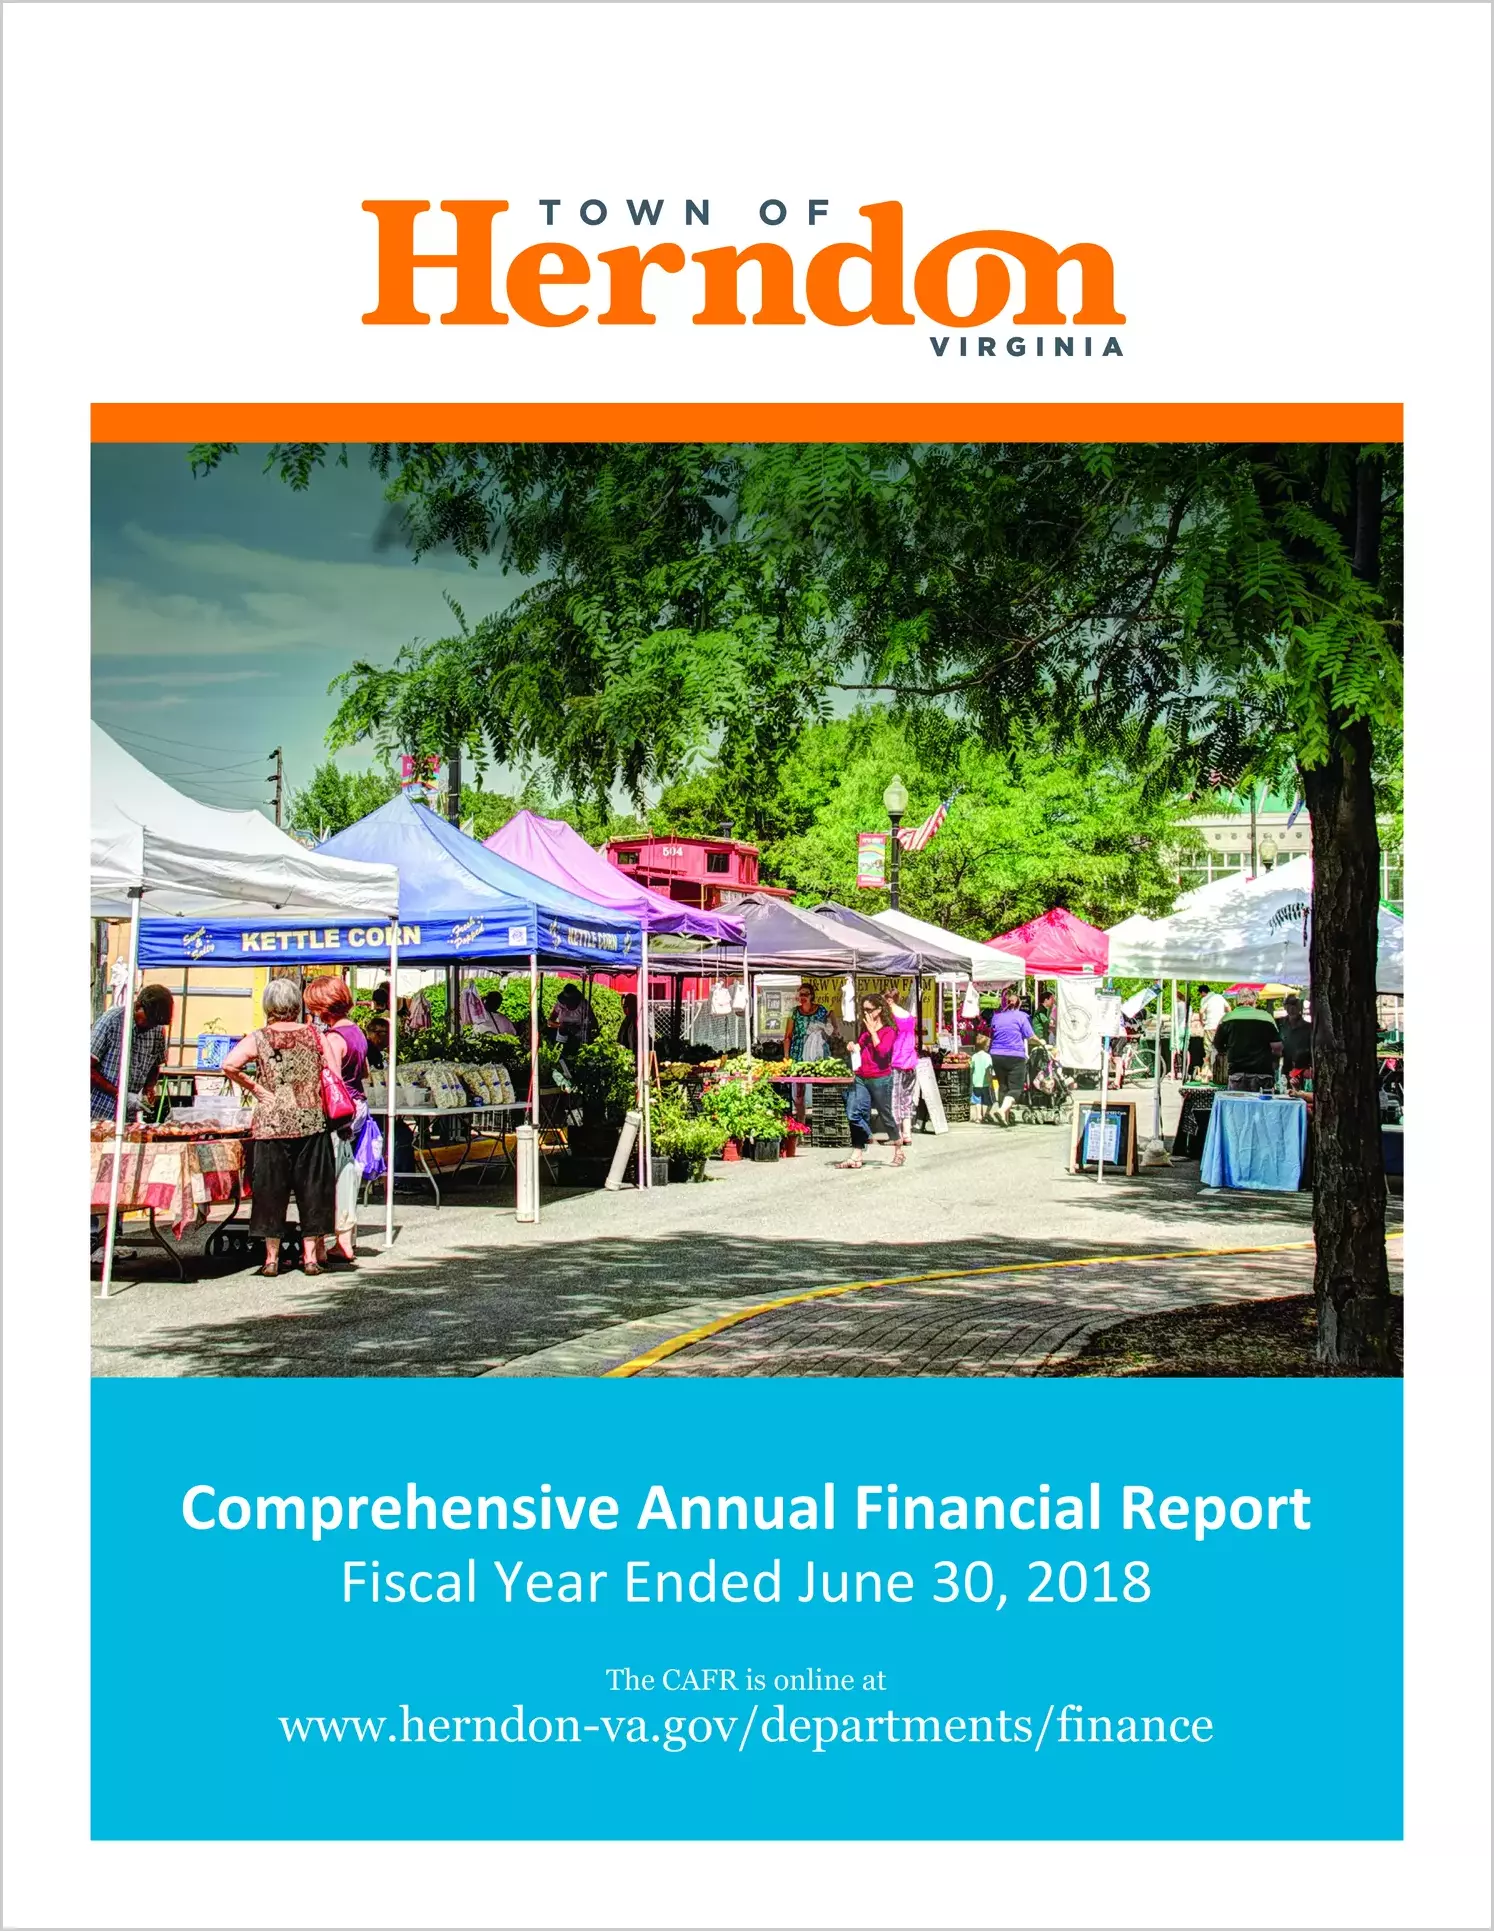 2018 Annual Financial Report for Town of Herndon